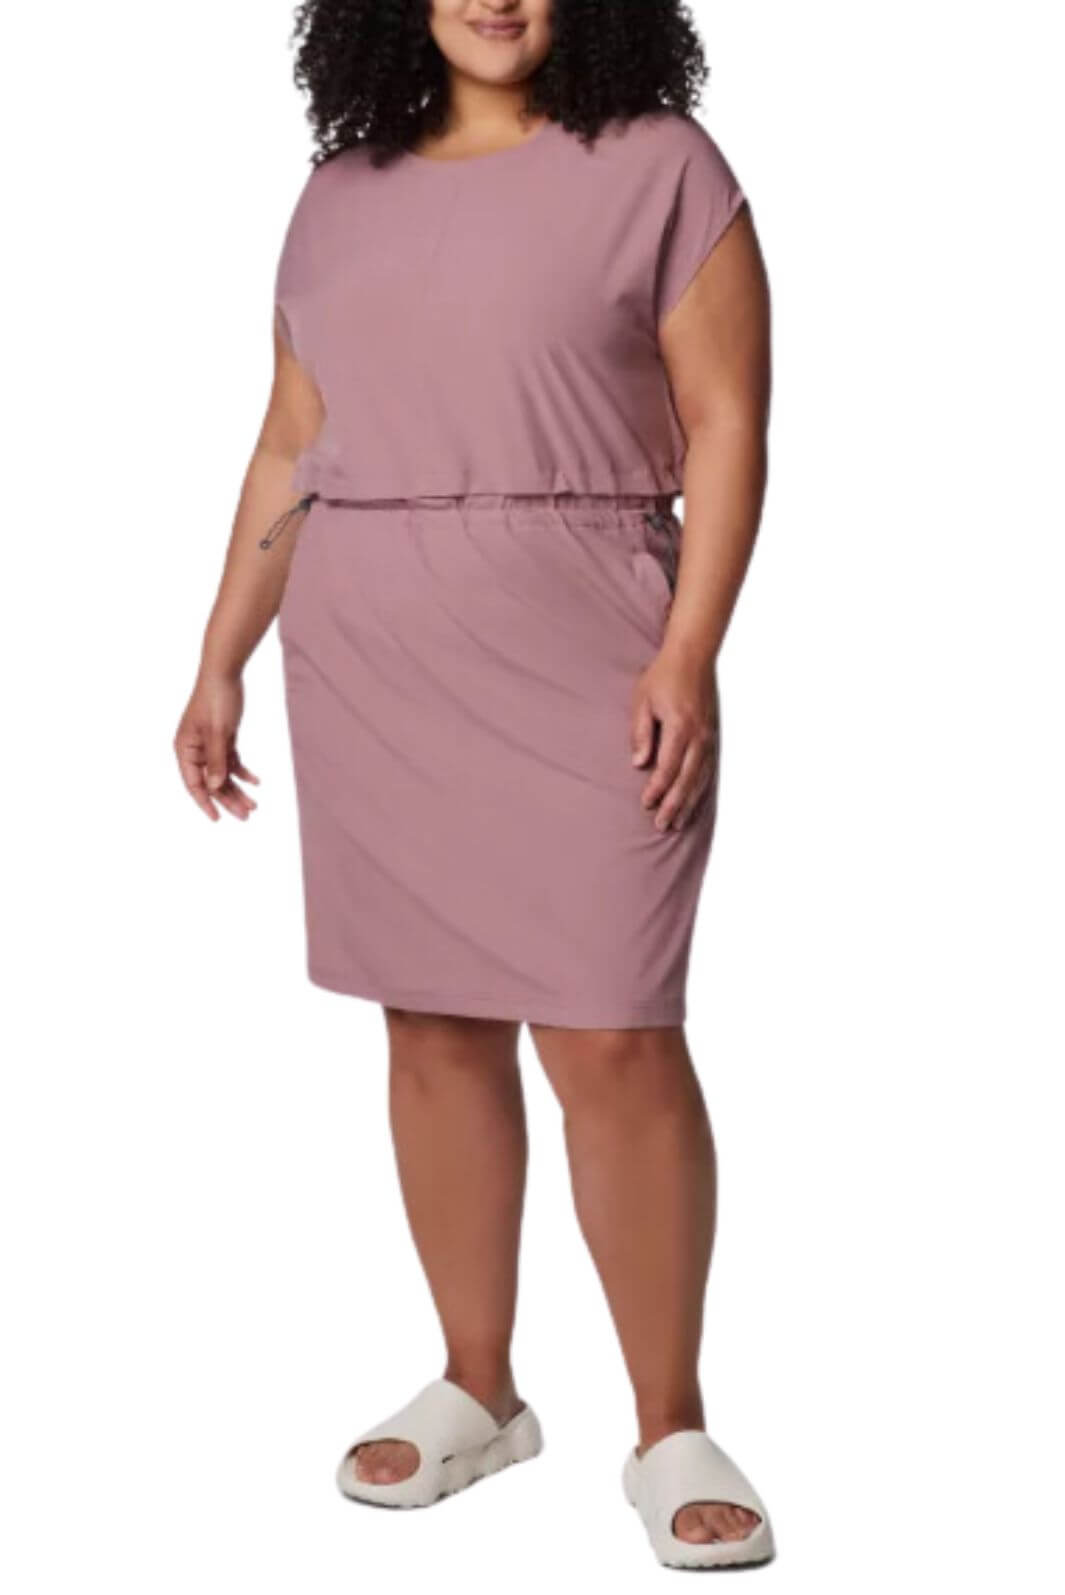 Plus Size Boundless Beauty Dress from Columbia